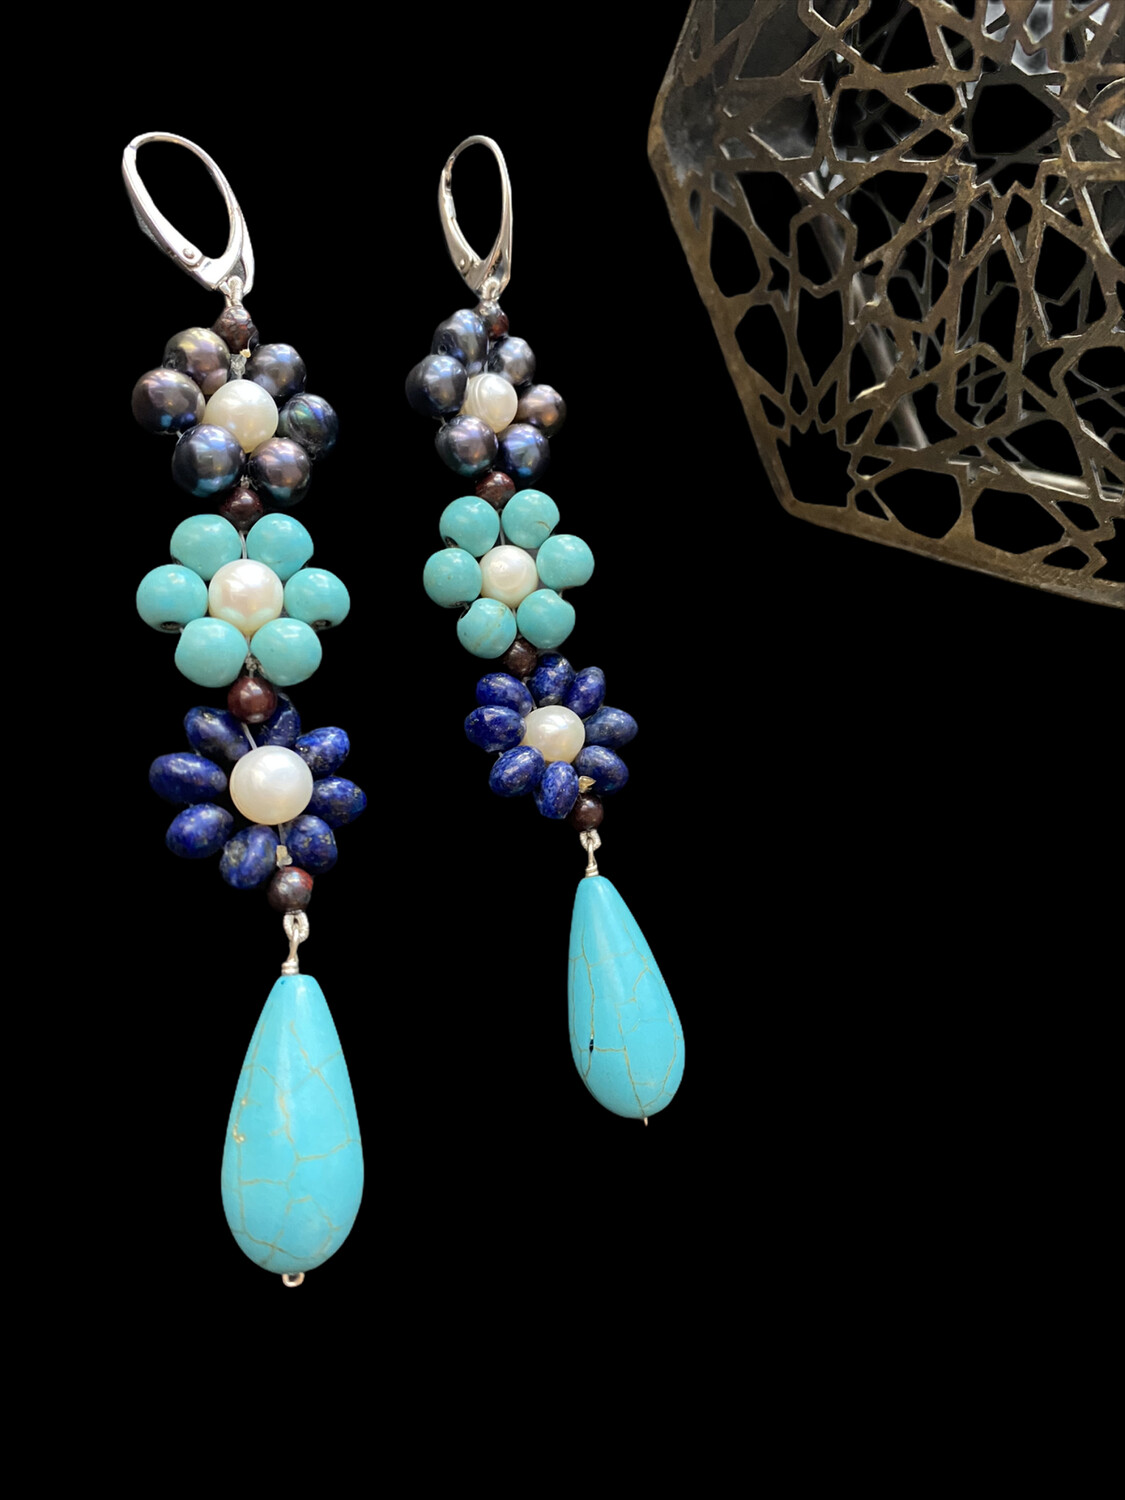 LARGE 3 FLOWER GEMSTONE EARRINGS WITH TURQUOISE DROP